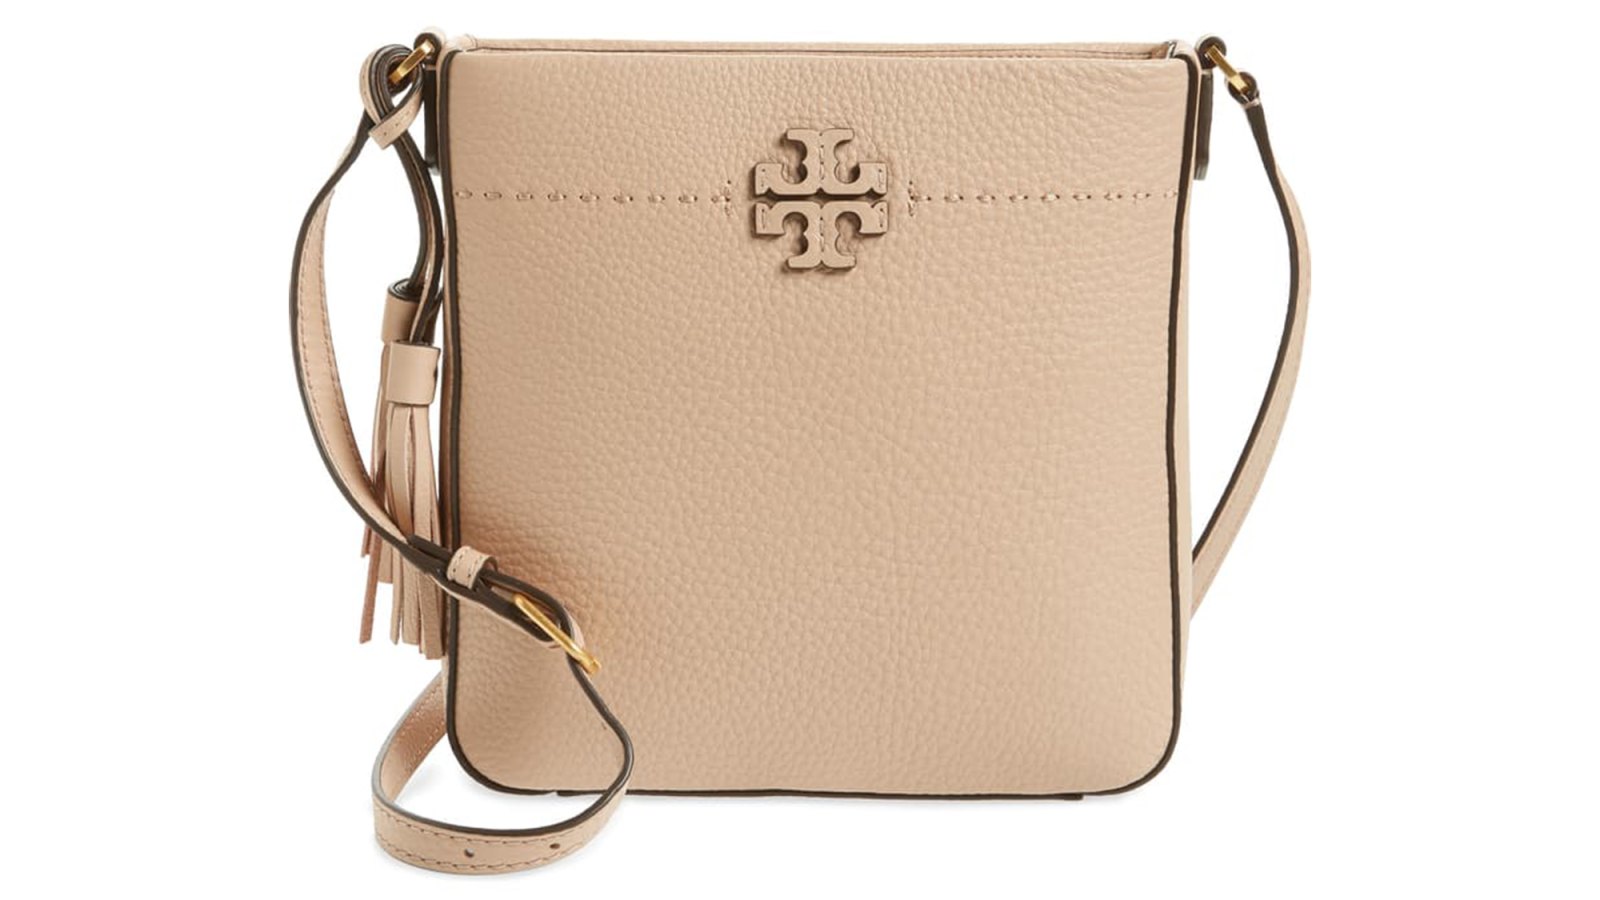 Scoop Up 5 of Our Favorite Bags Up to 50% Off at Nordstrom Right Now!